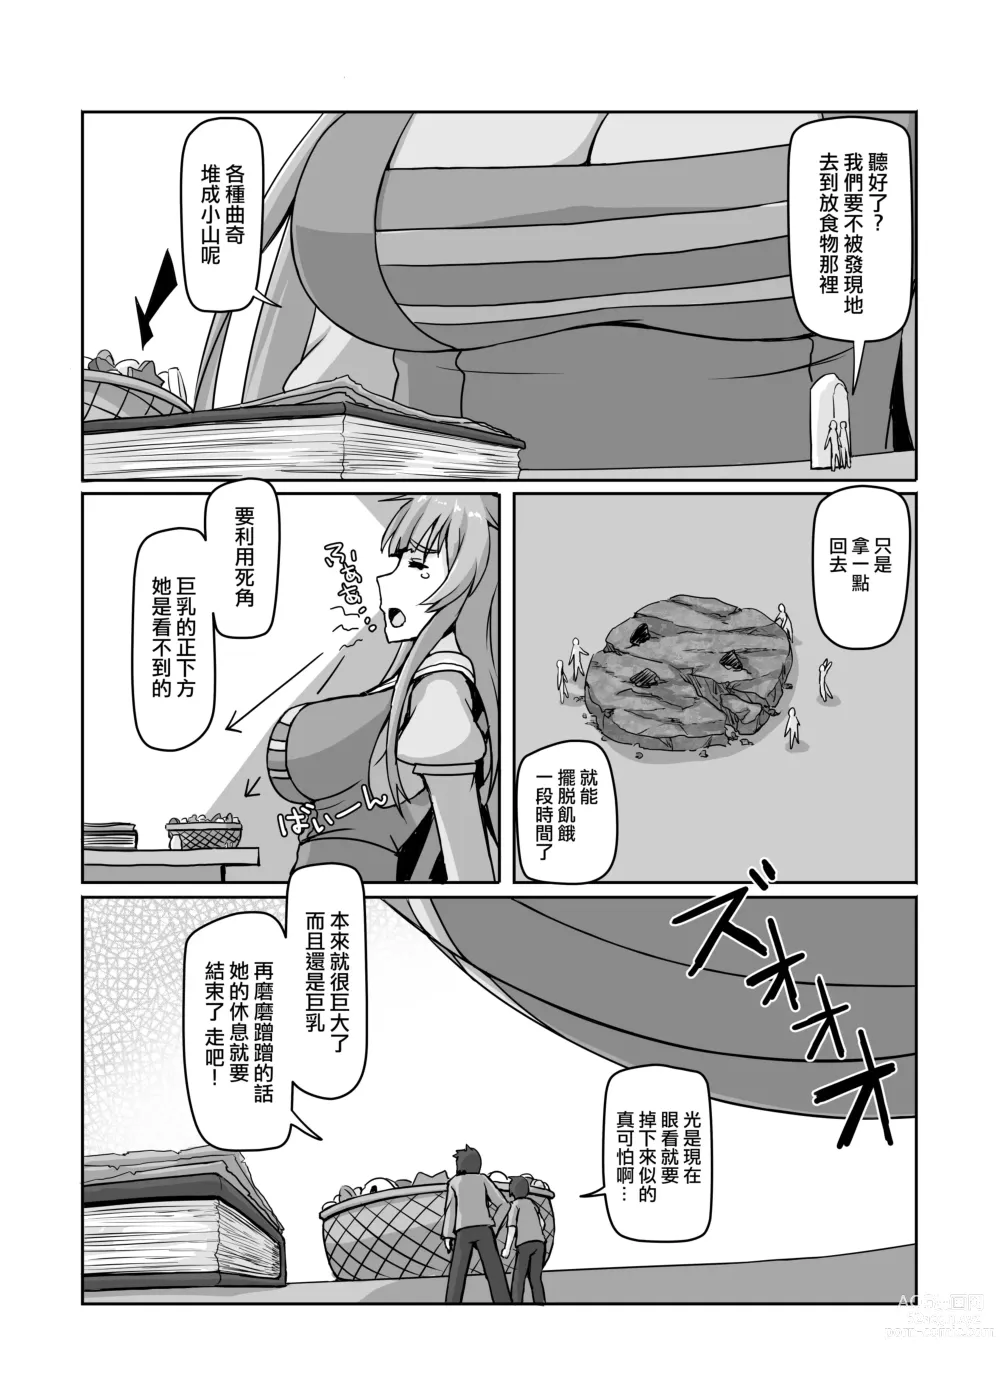 Page 5 of doujinshi 小小人類就由我來衰退